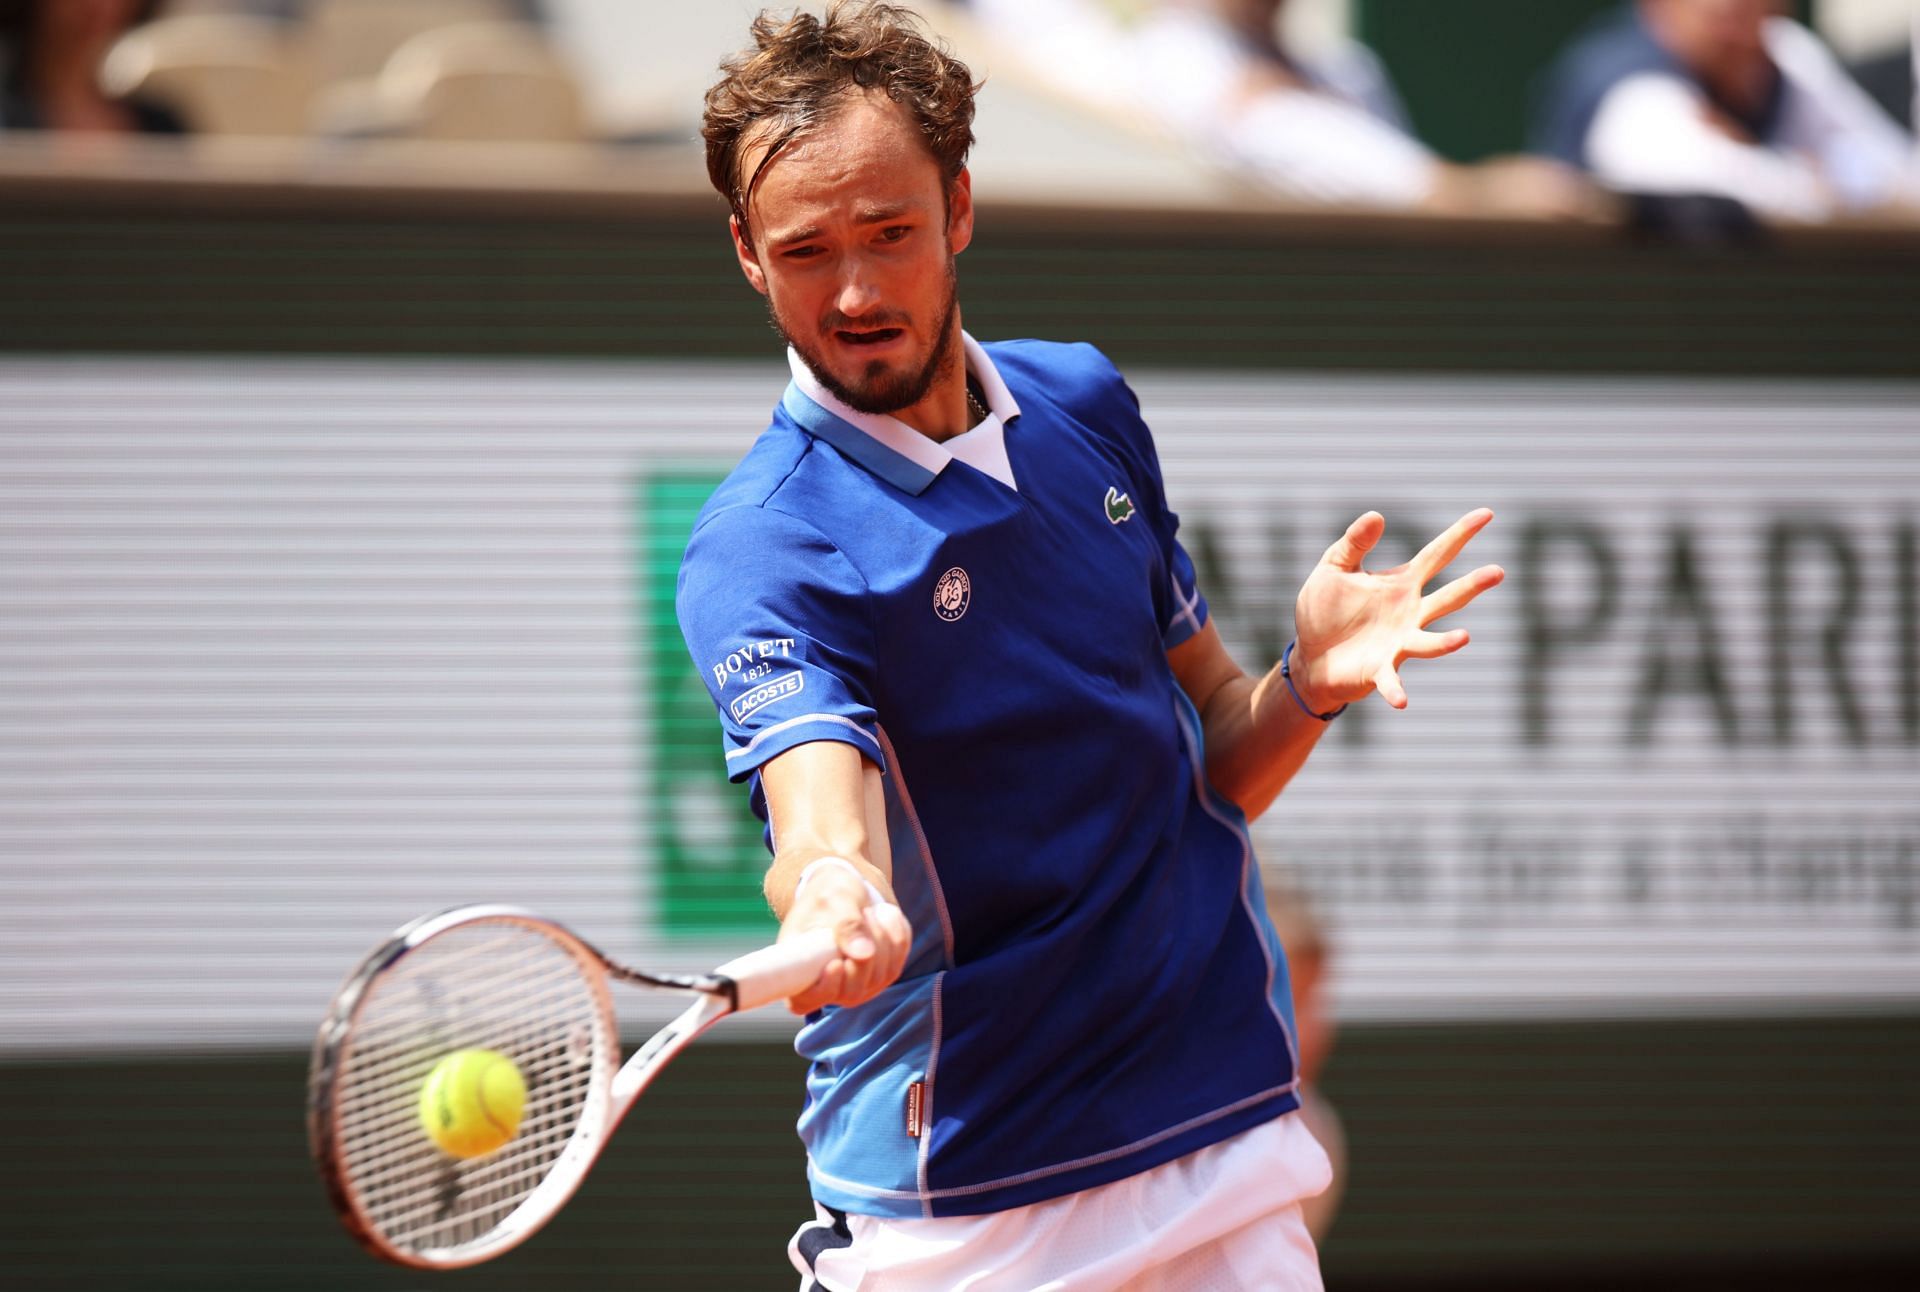 Daniil Medvedev is the top seed at the Halle Open this year